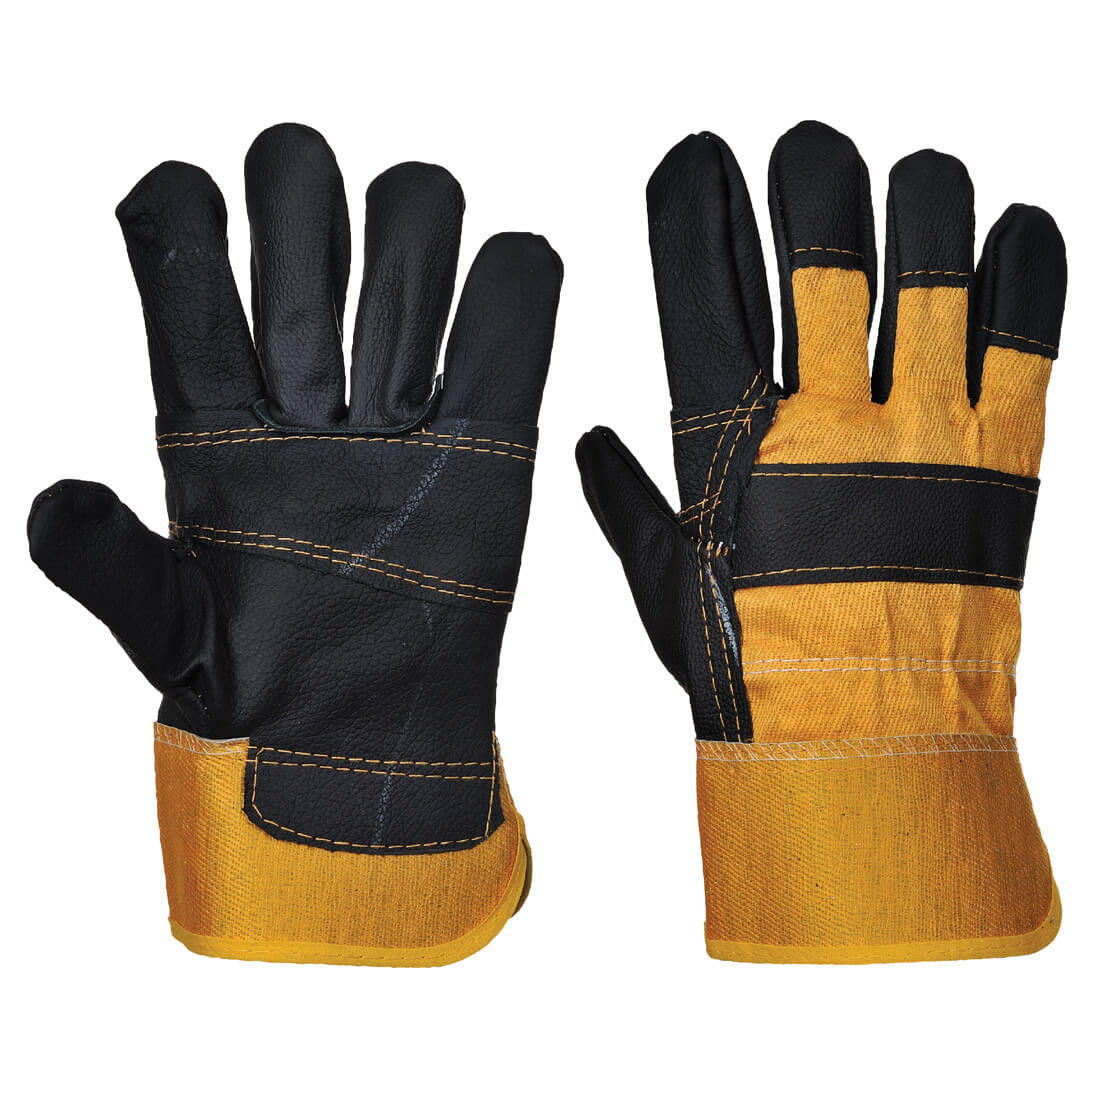 Furniture Hide Glove - Personal protection